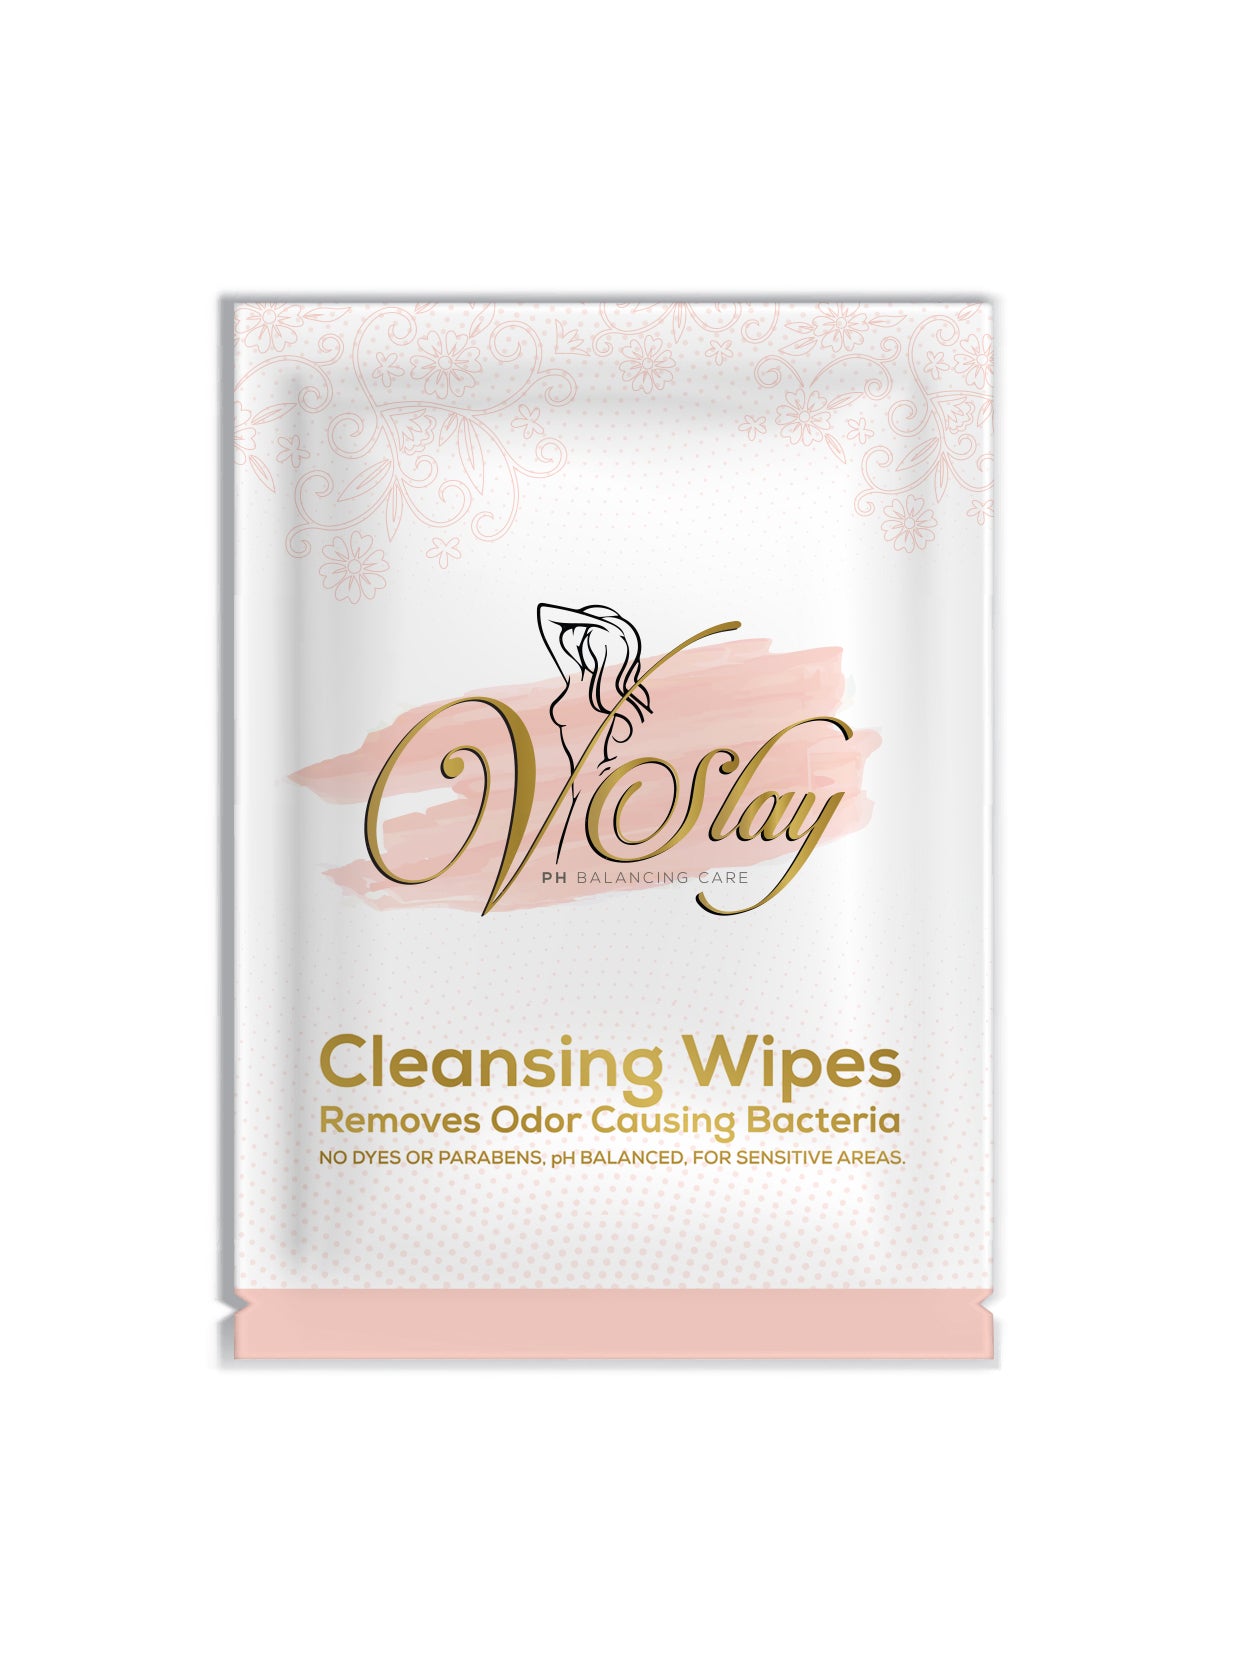 VSlay Cleansing Wipes